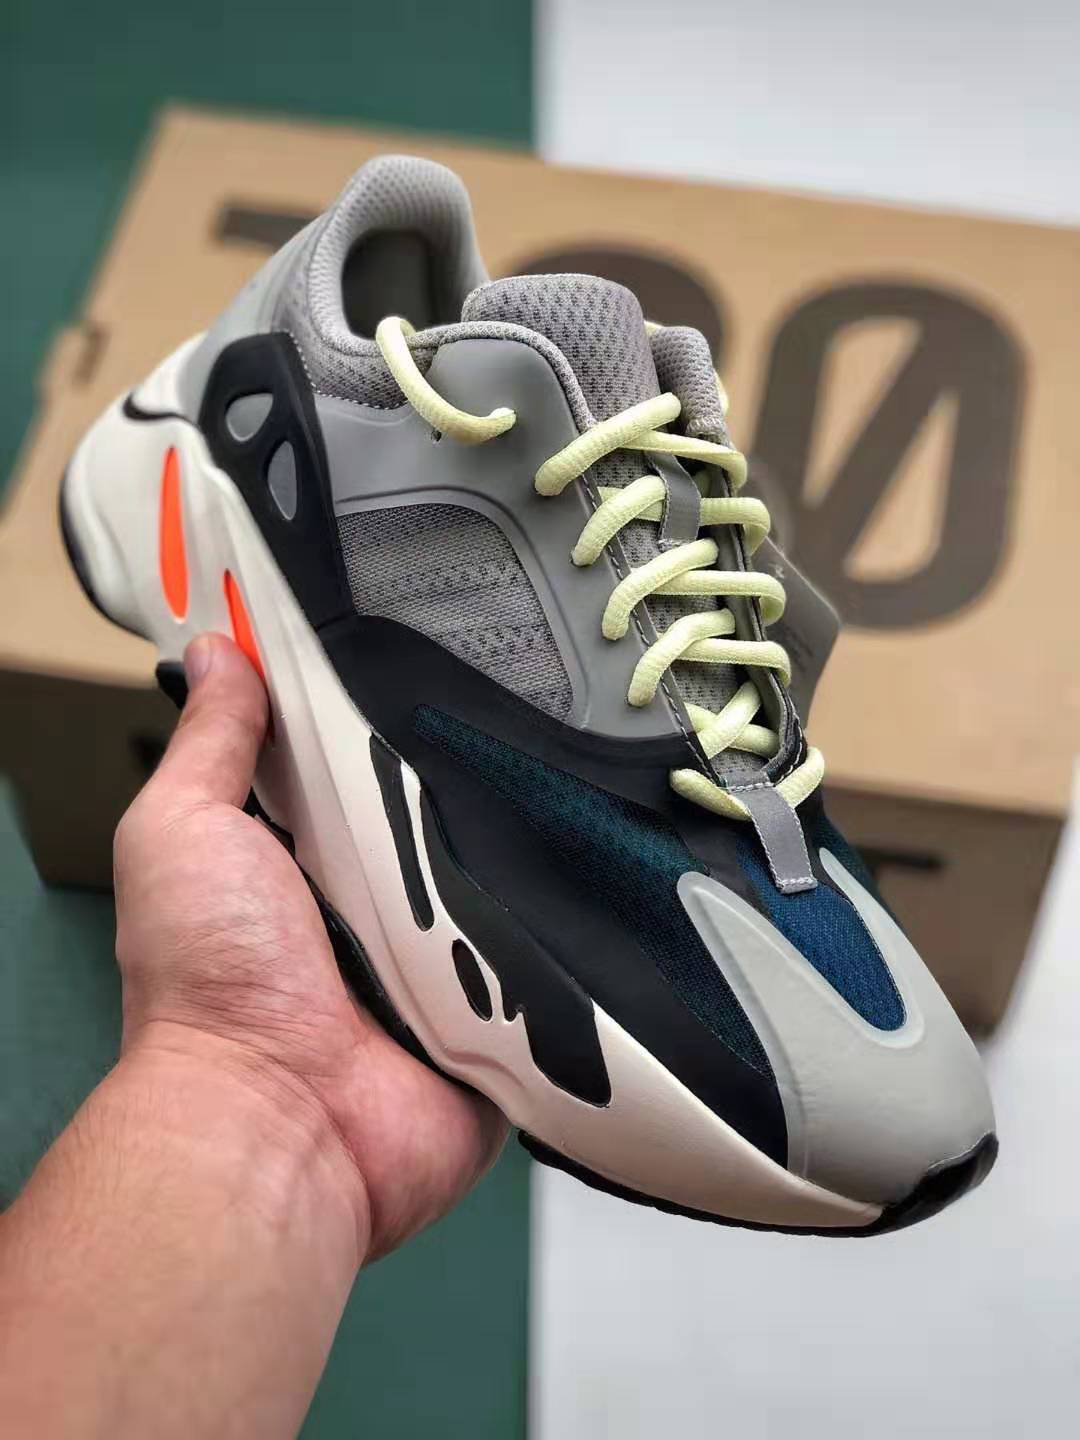 ADIDAS YEEZY BOOST 700 'WAVE RUNNER' B75571 - Premium Footwear for Style and Performance